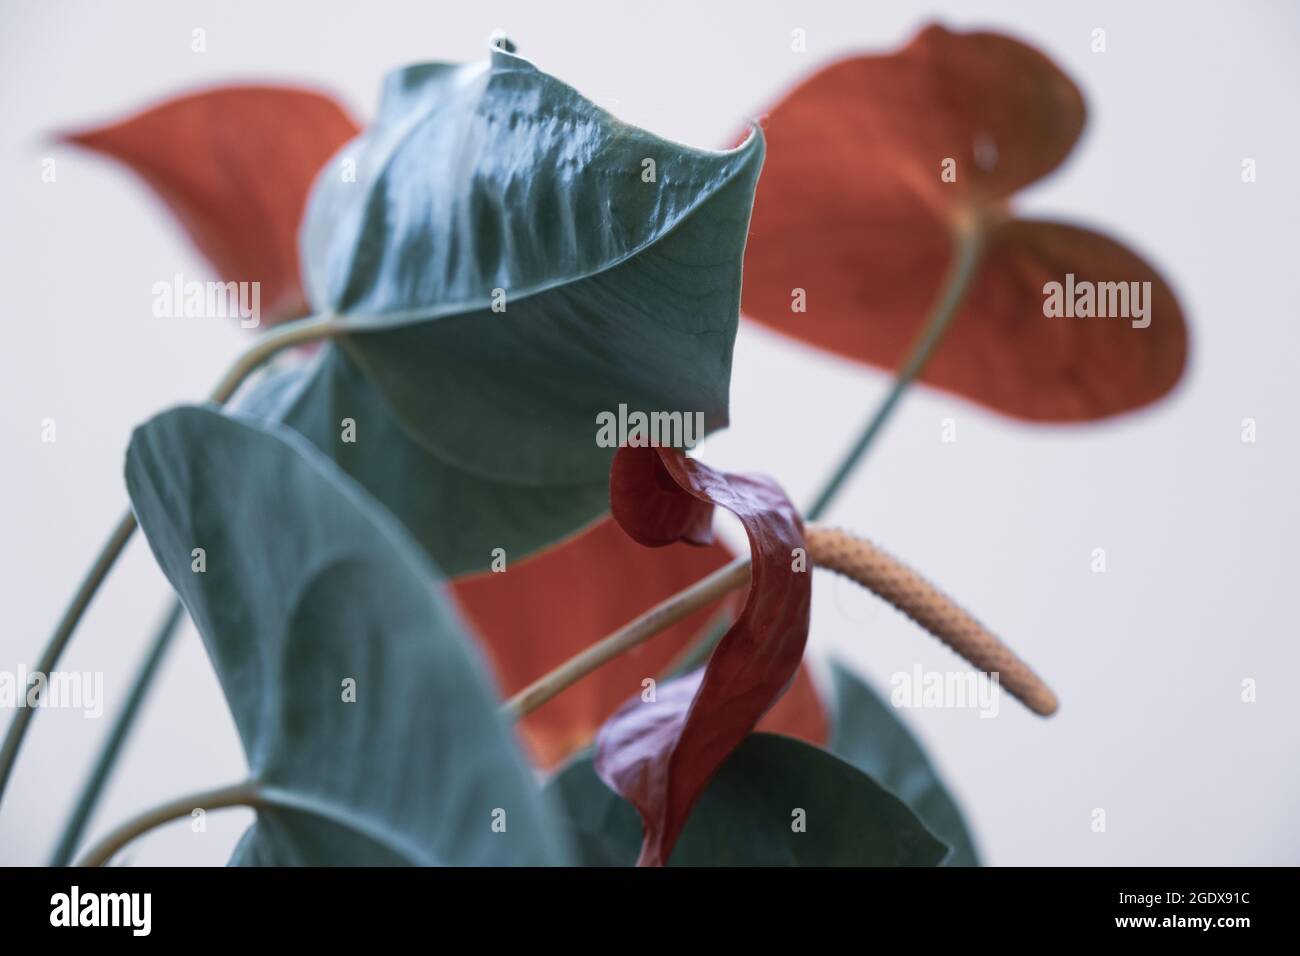 Anthurium flowers and leaves cold tones abstract background Stock Photo